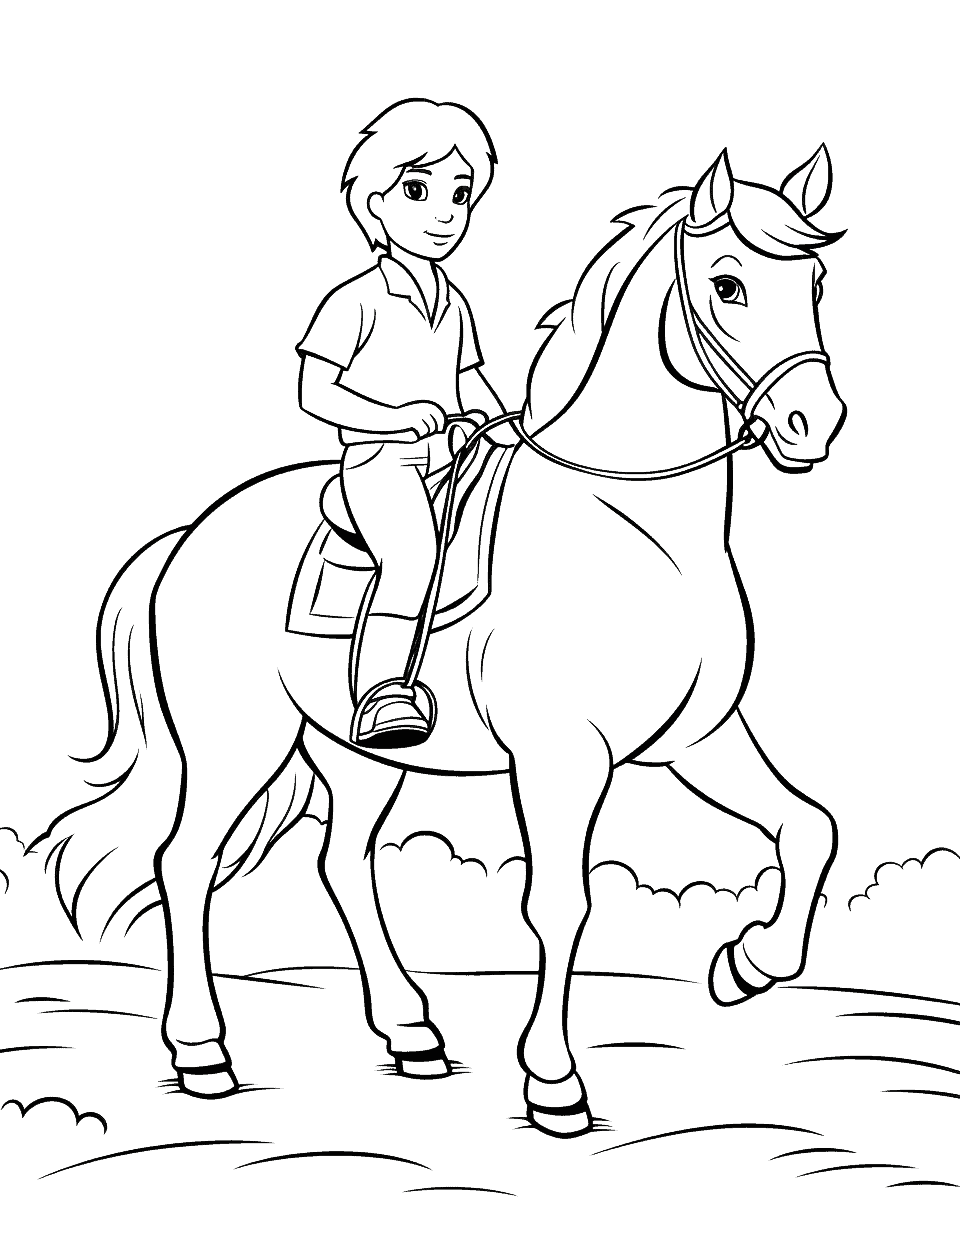 Horse Riding Lesson Coloring Page - A young rider learning to ride with a patient, gentle horse.